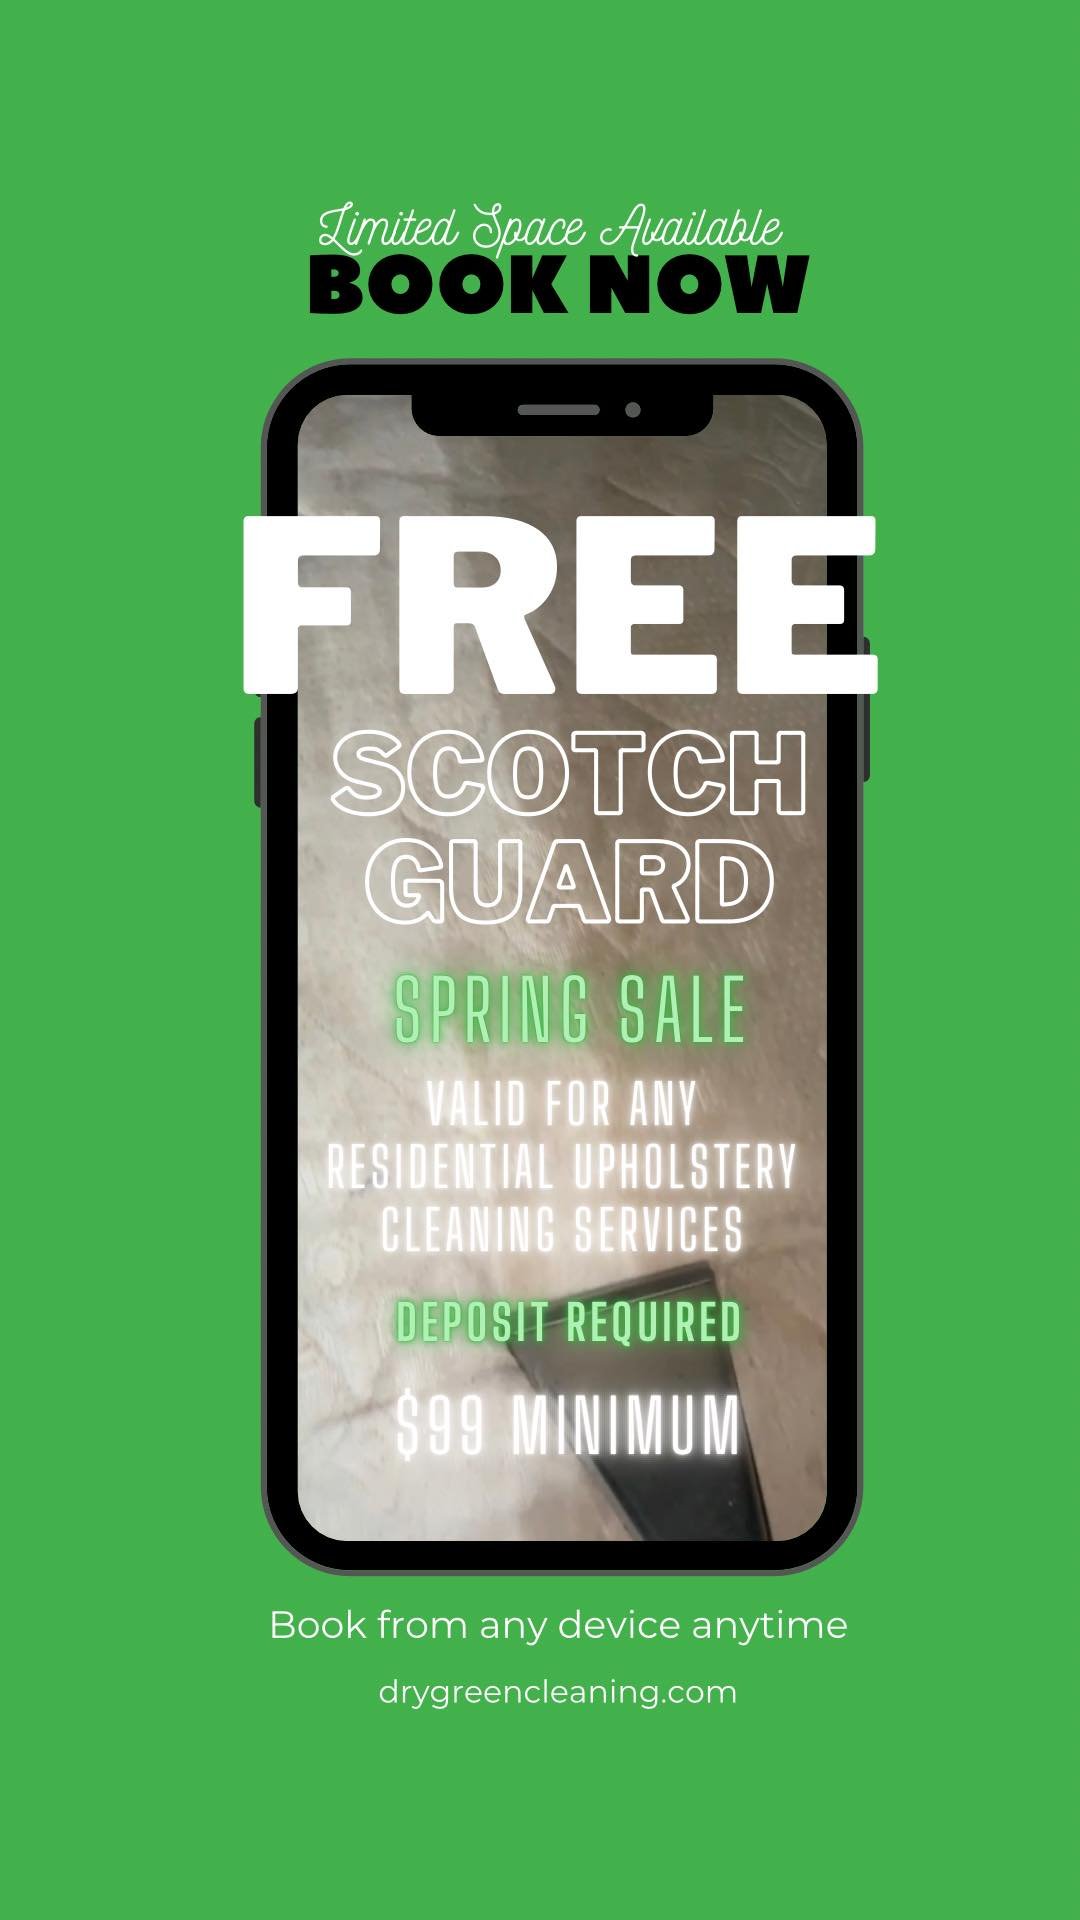 FREE SCOTCH GUARD W/ UPHOLSTERY CLEANING! — Dry Green Cleaning LLC